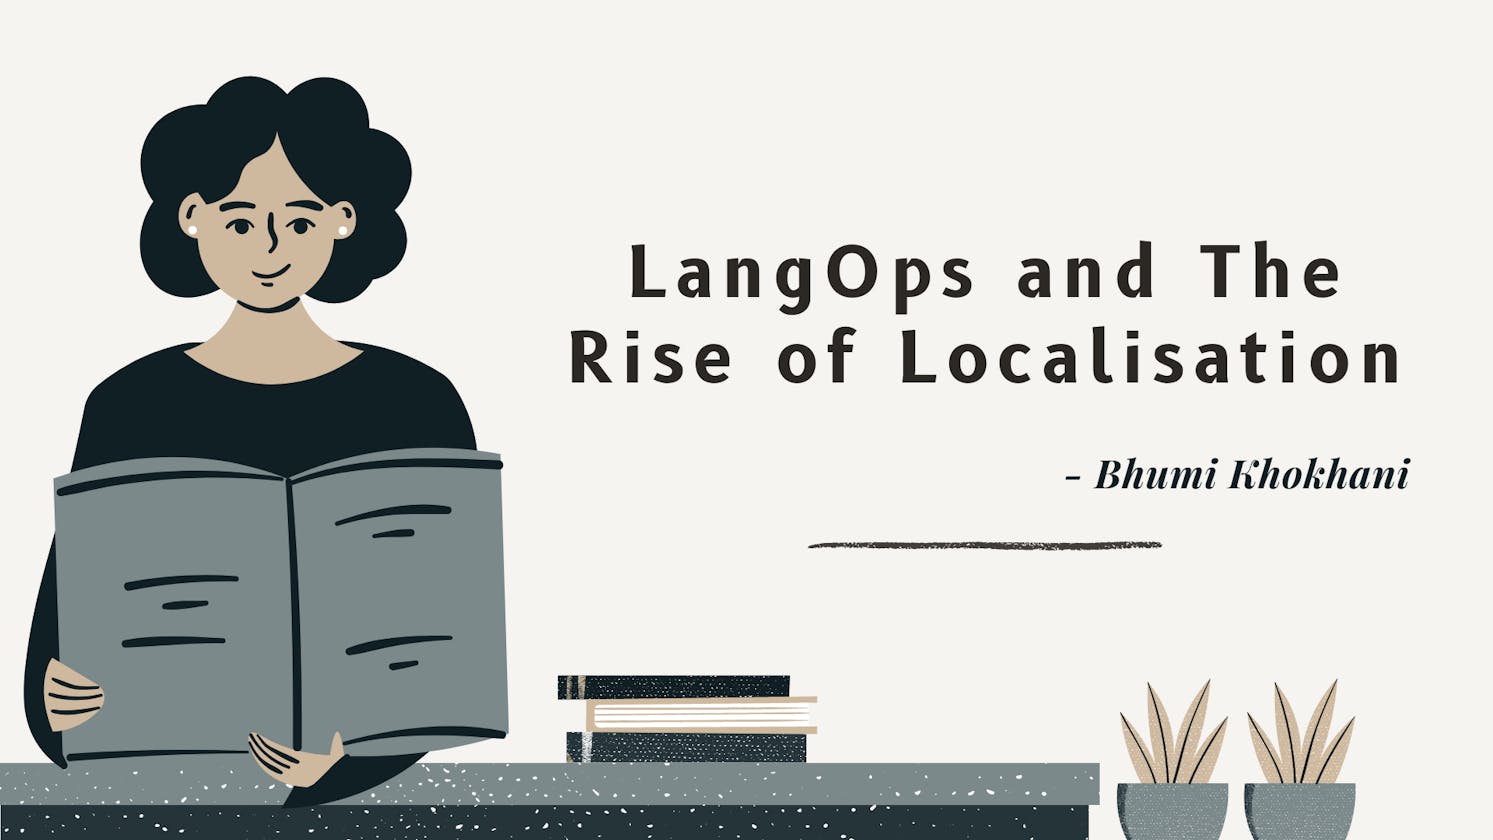 LangOps and The Rise of Localisation